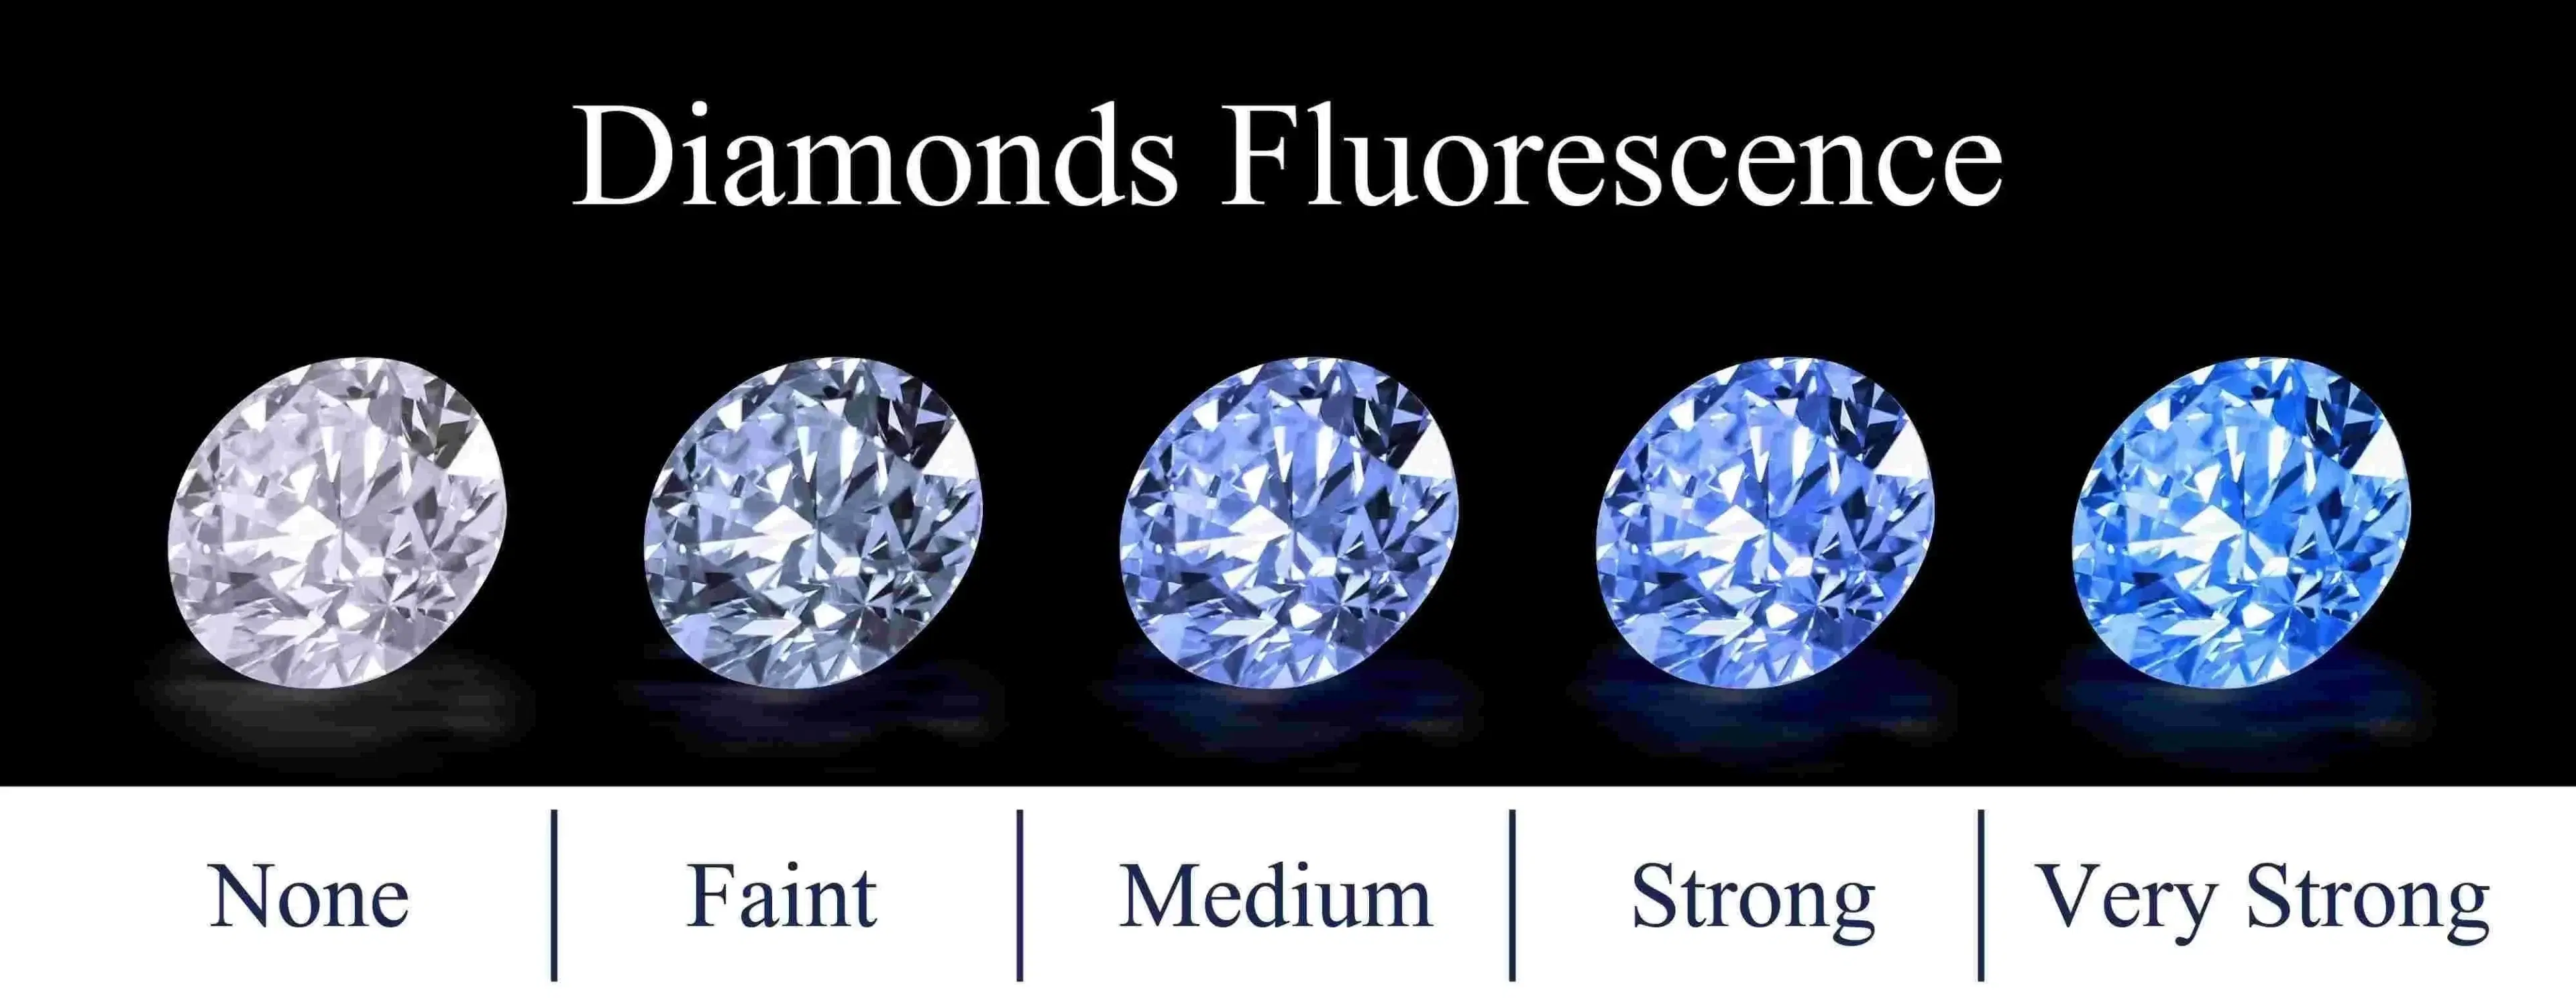 Diamond Fluorescence: When to Avoid It, Especially Very Strong Blue